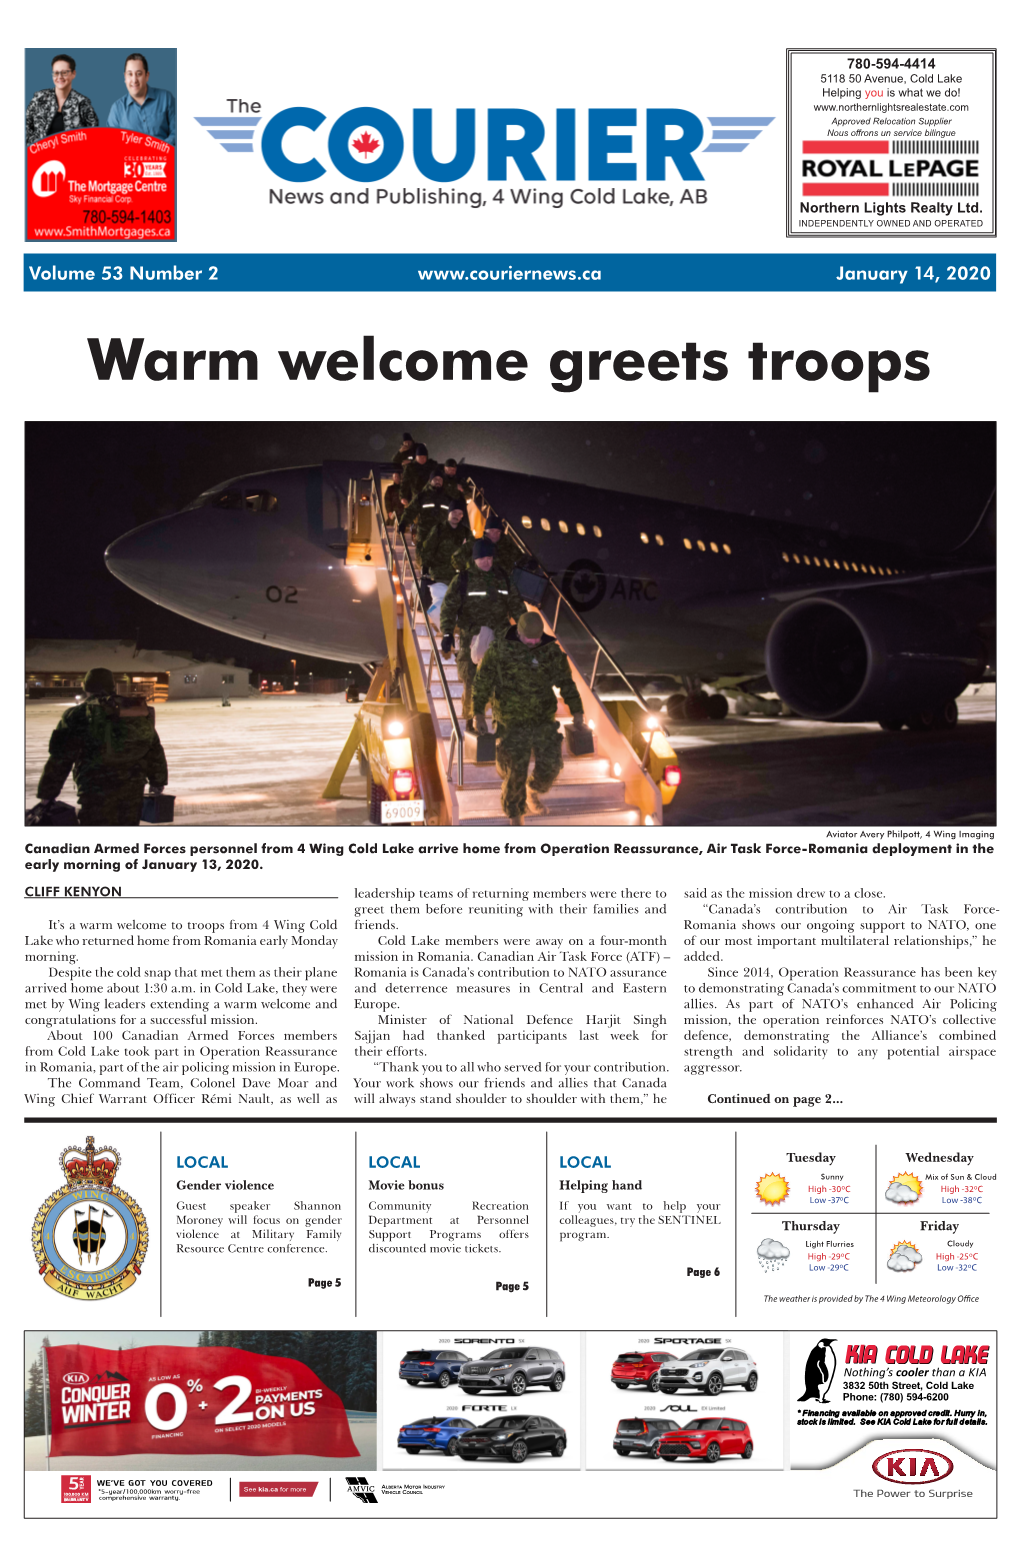 Warm Welcome Greets Troops